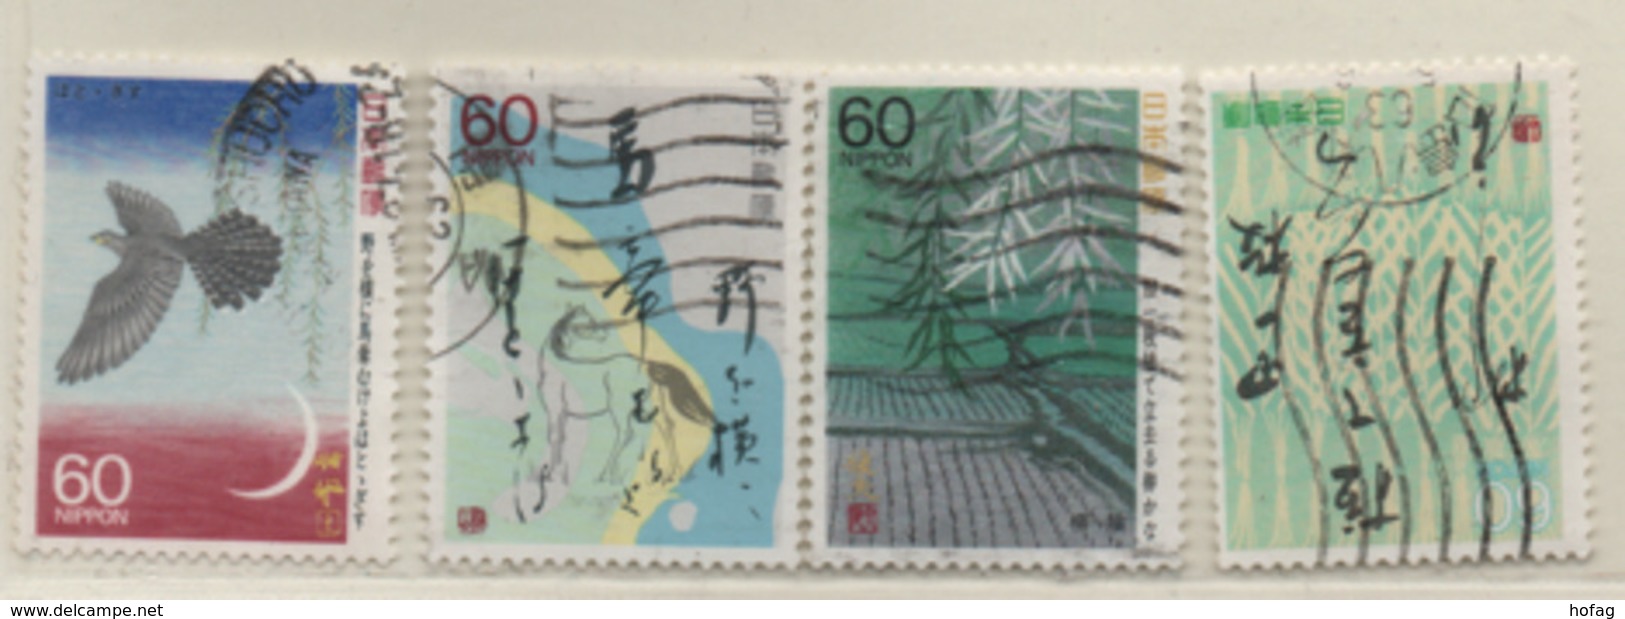 Japan 1987 MiNr.: 1740A-1743A Basho Matsuo Gestempelt; Used Yt: 1636-1639 - Used Stamps